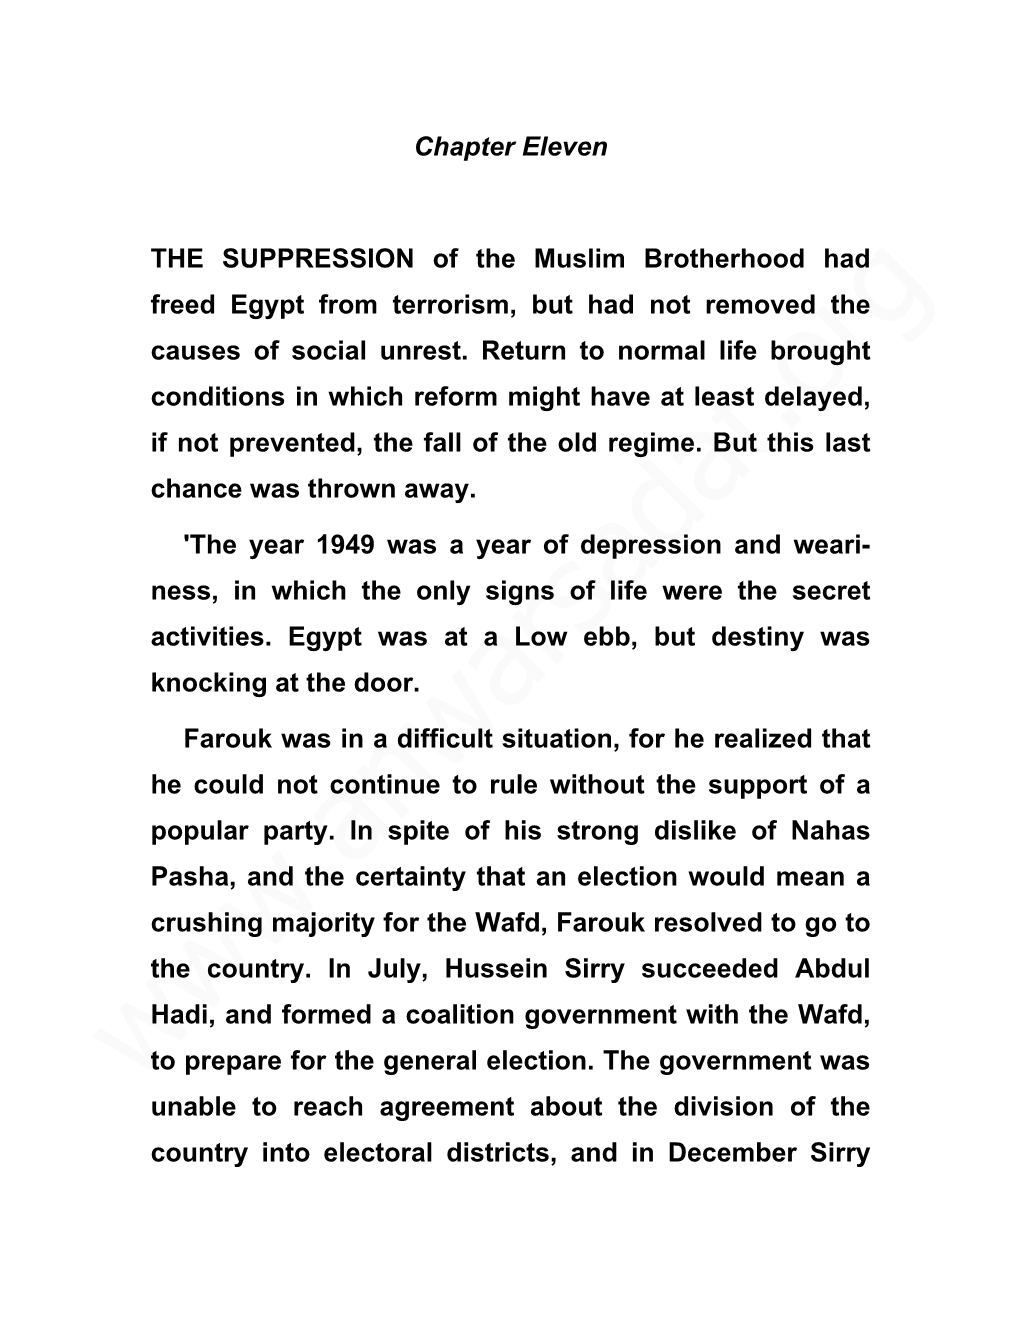 Chapter Eleven the SUPPRESSION of the Muslim Brotherhood Had